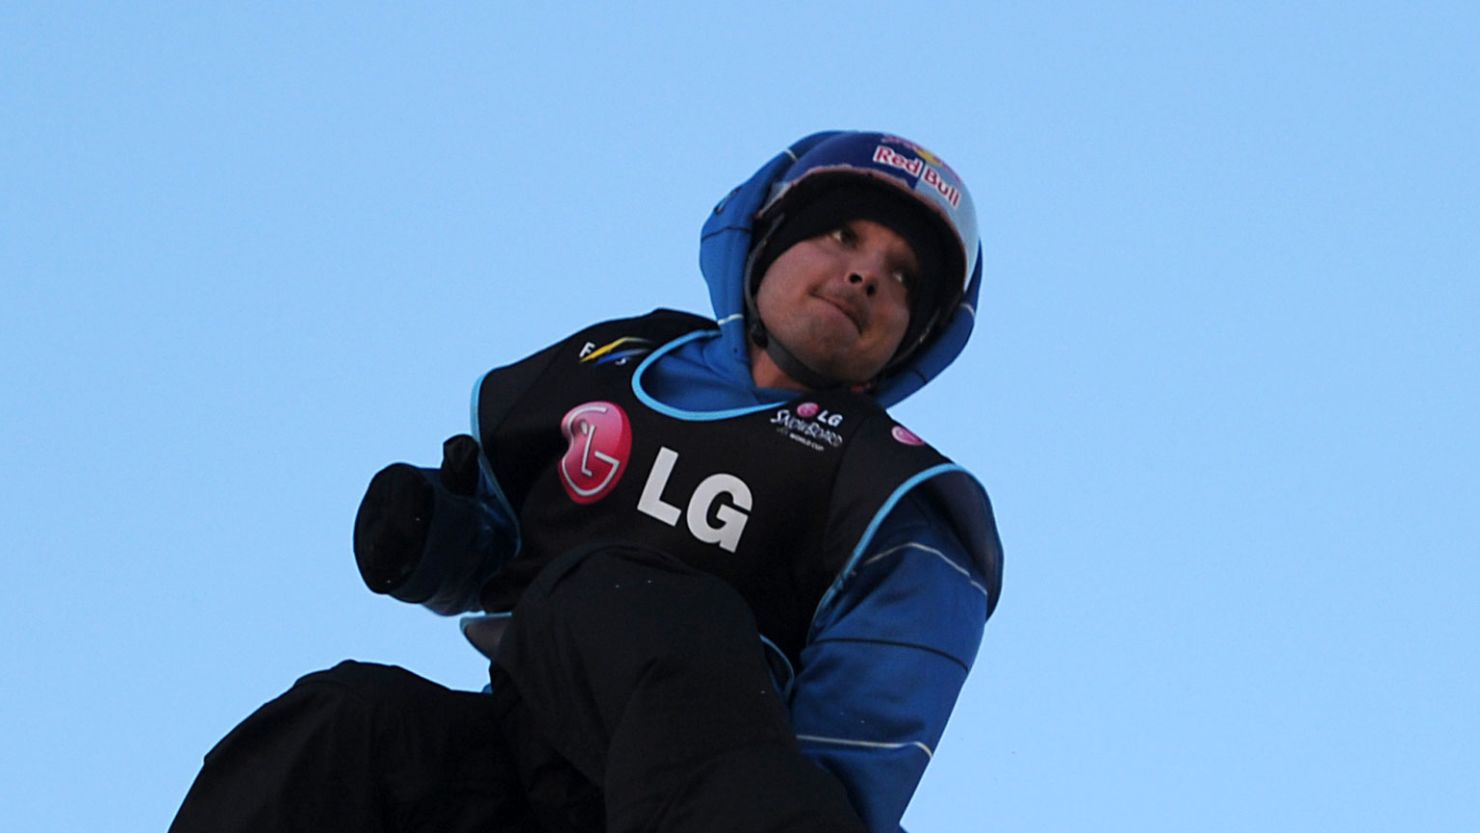 Marko Grilc of Slovenia during the 2010 LG Snowboard FIS World Cup in London.